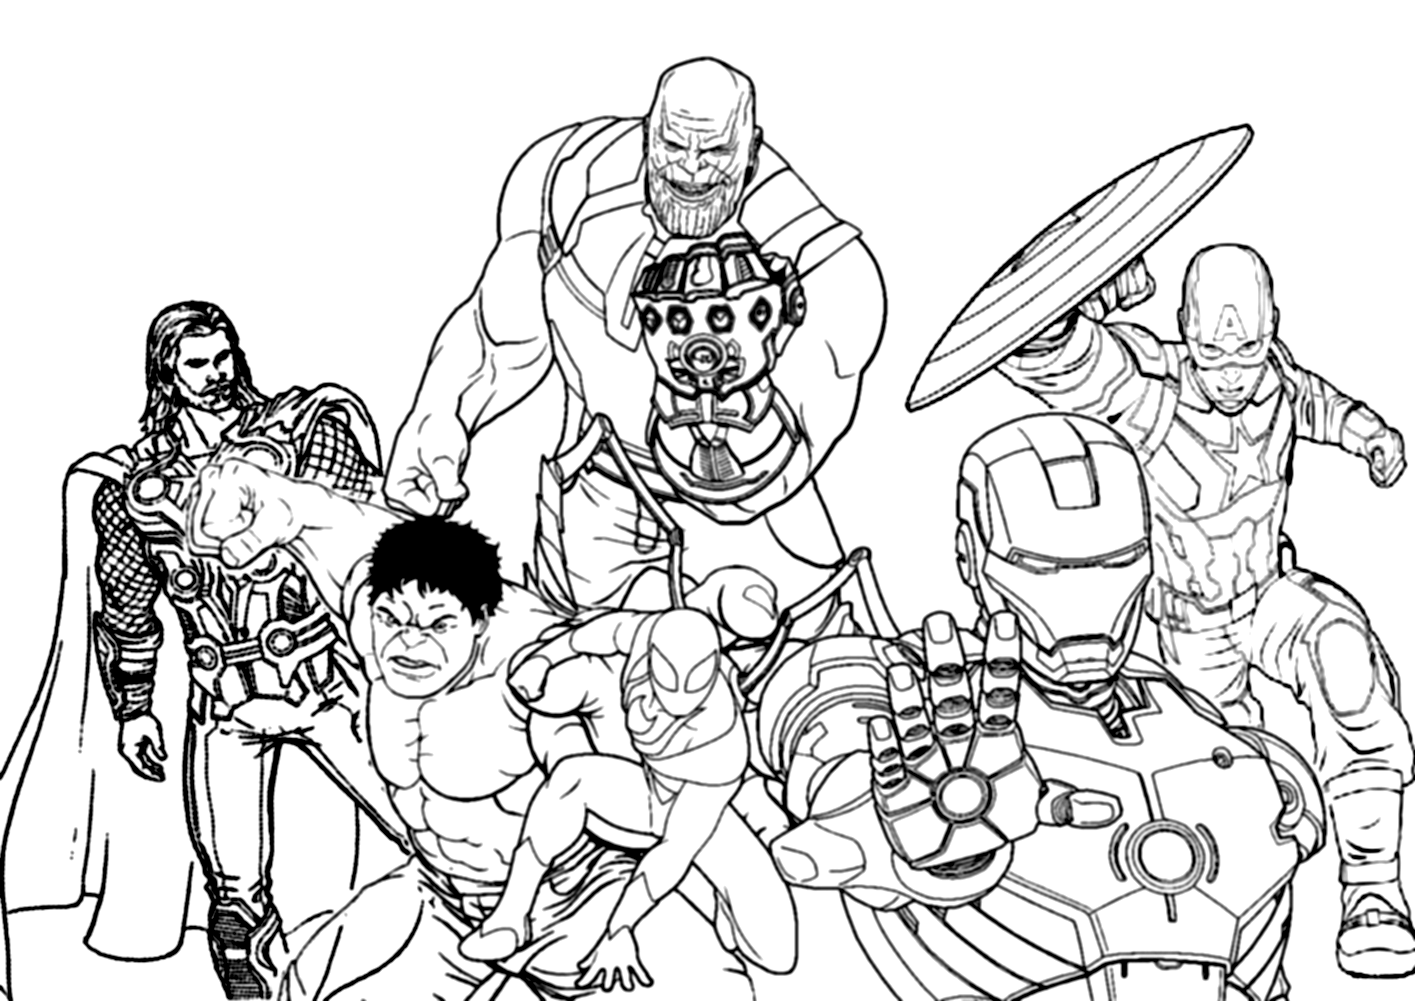 Infinity War Avengers Coloring Page for kids